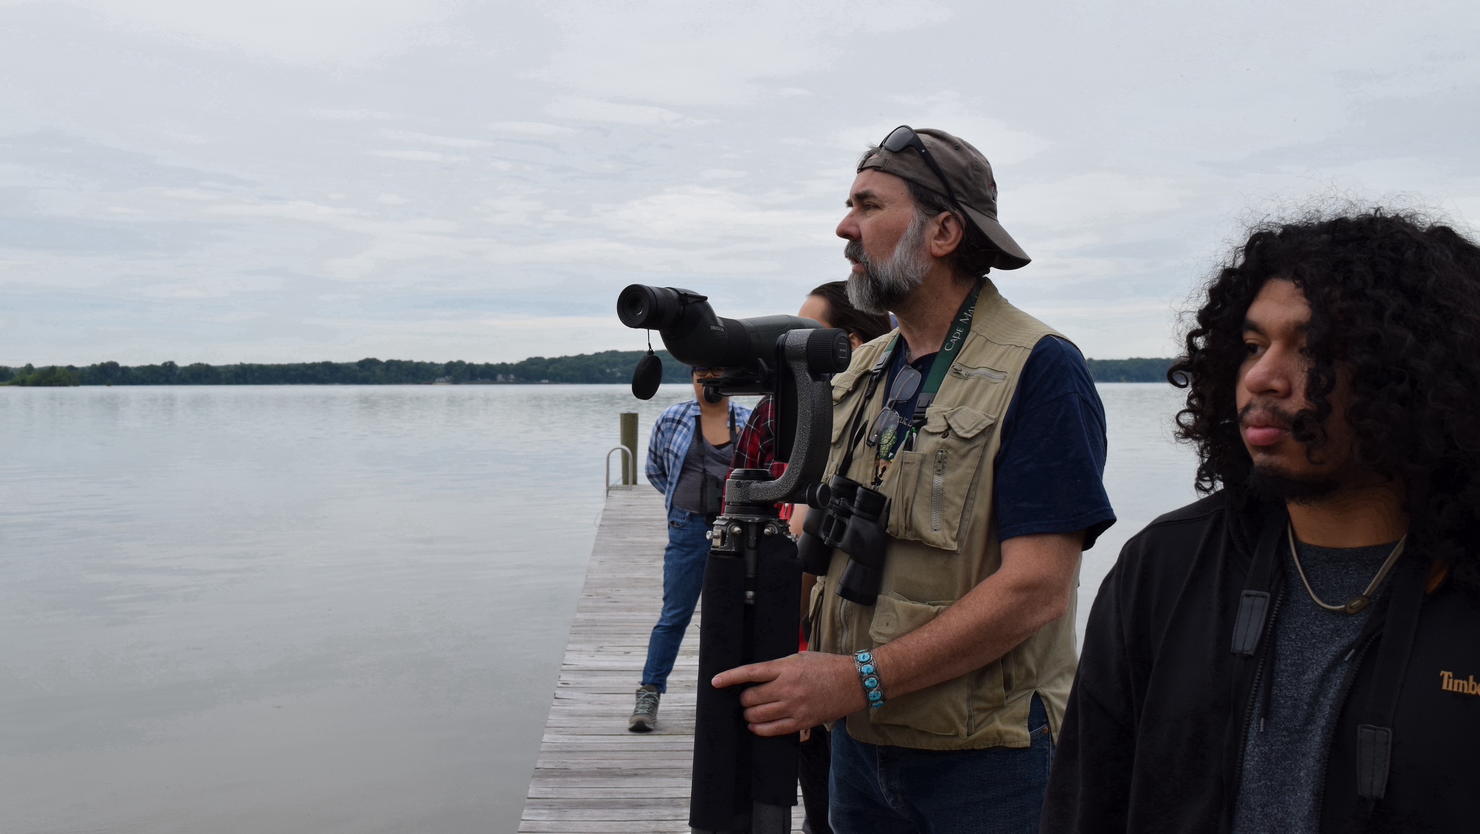 Dr. Tom Wood and Brian Jiménez during a wildlife assessment. Dr. Wood is using a spotting scope on a gimbal and looking out across a body of water.